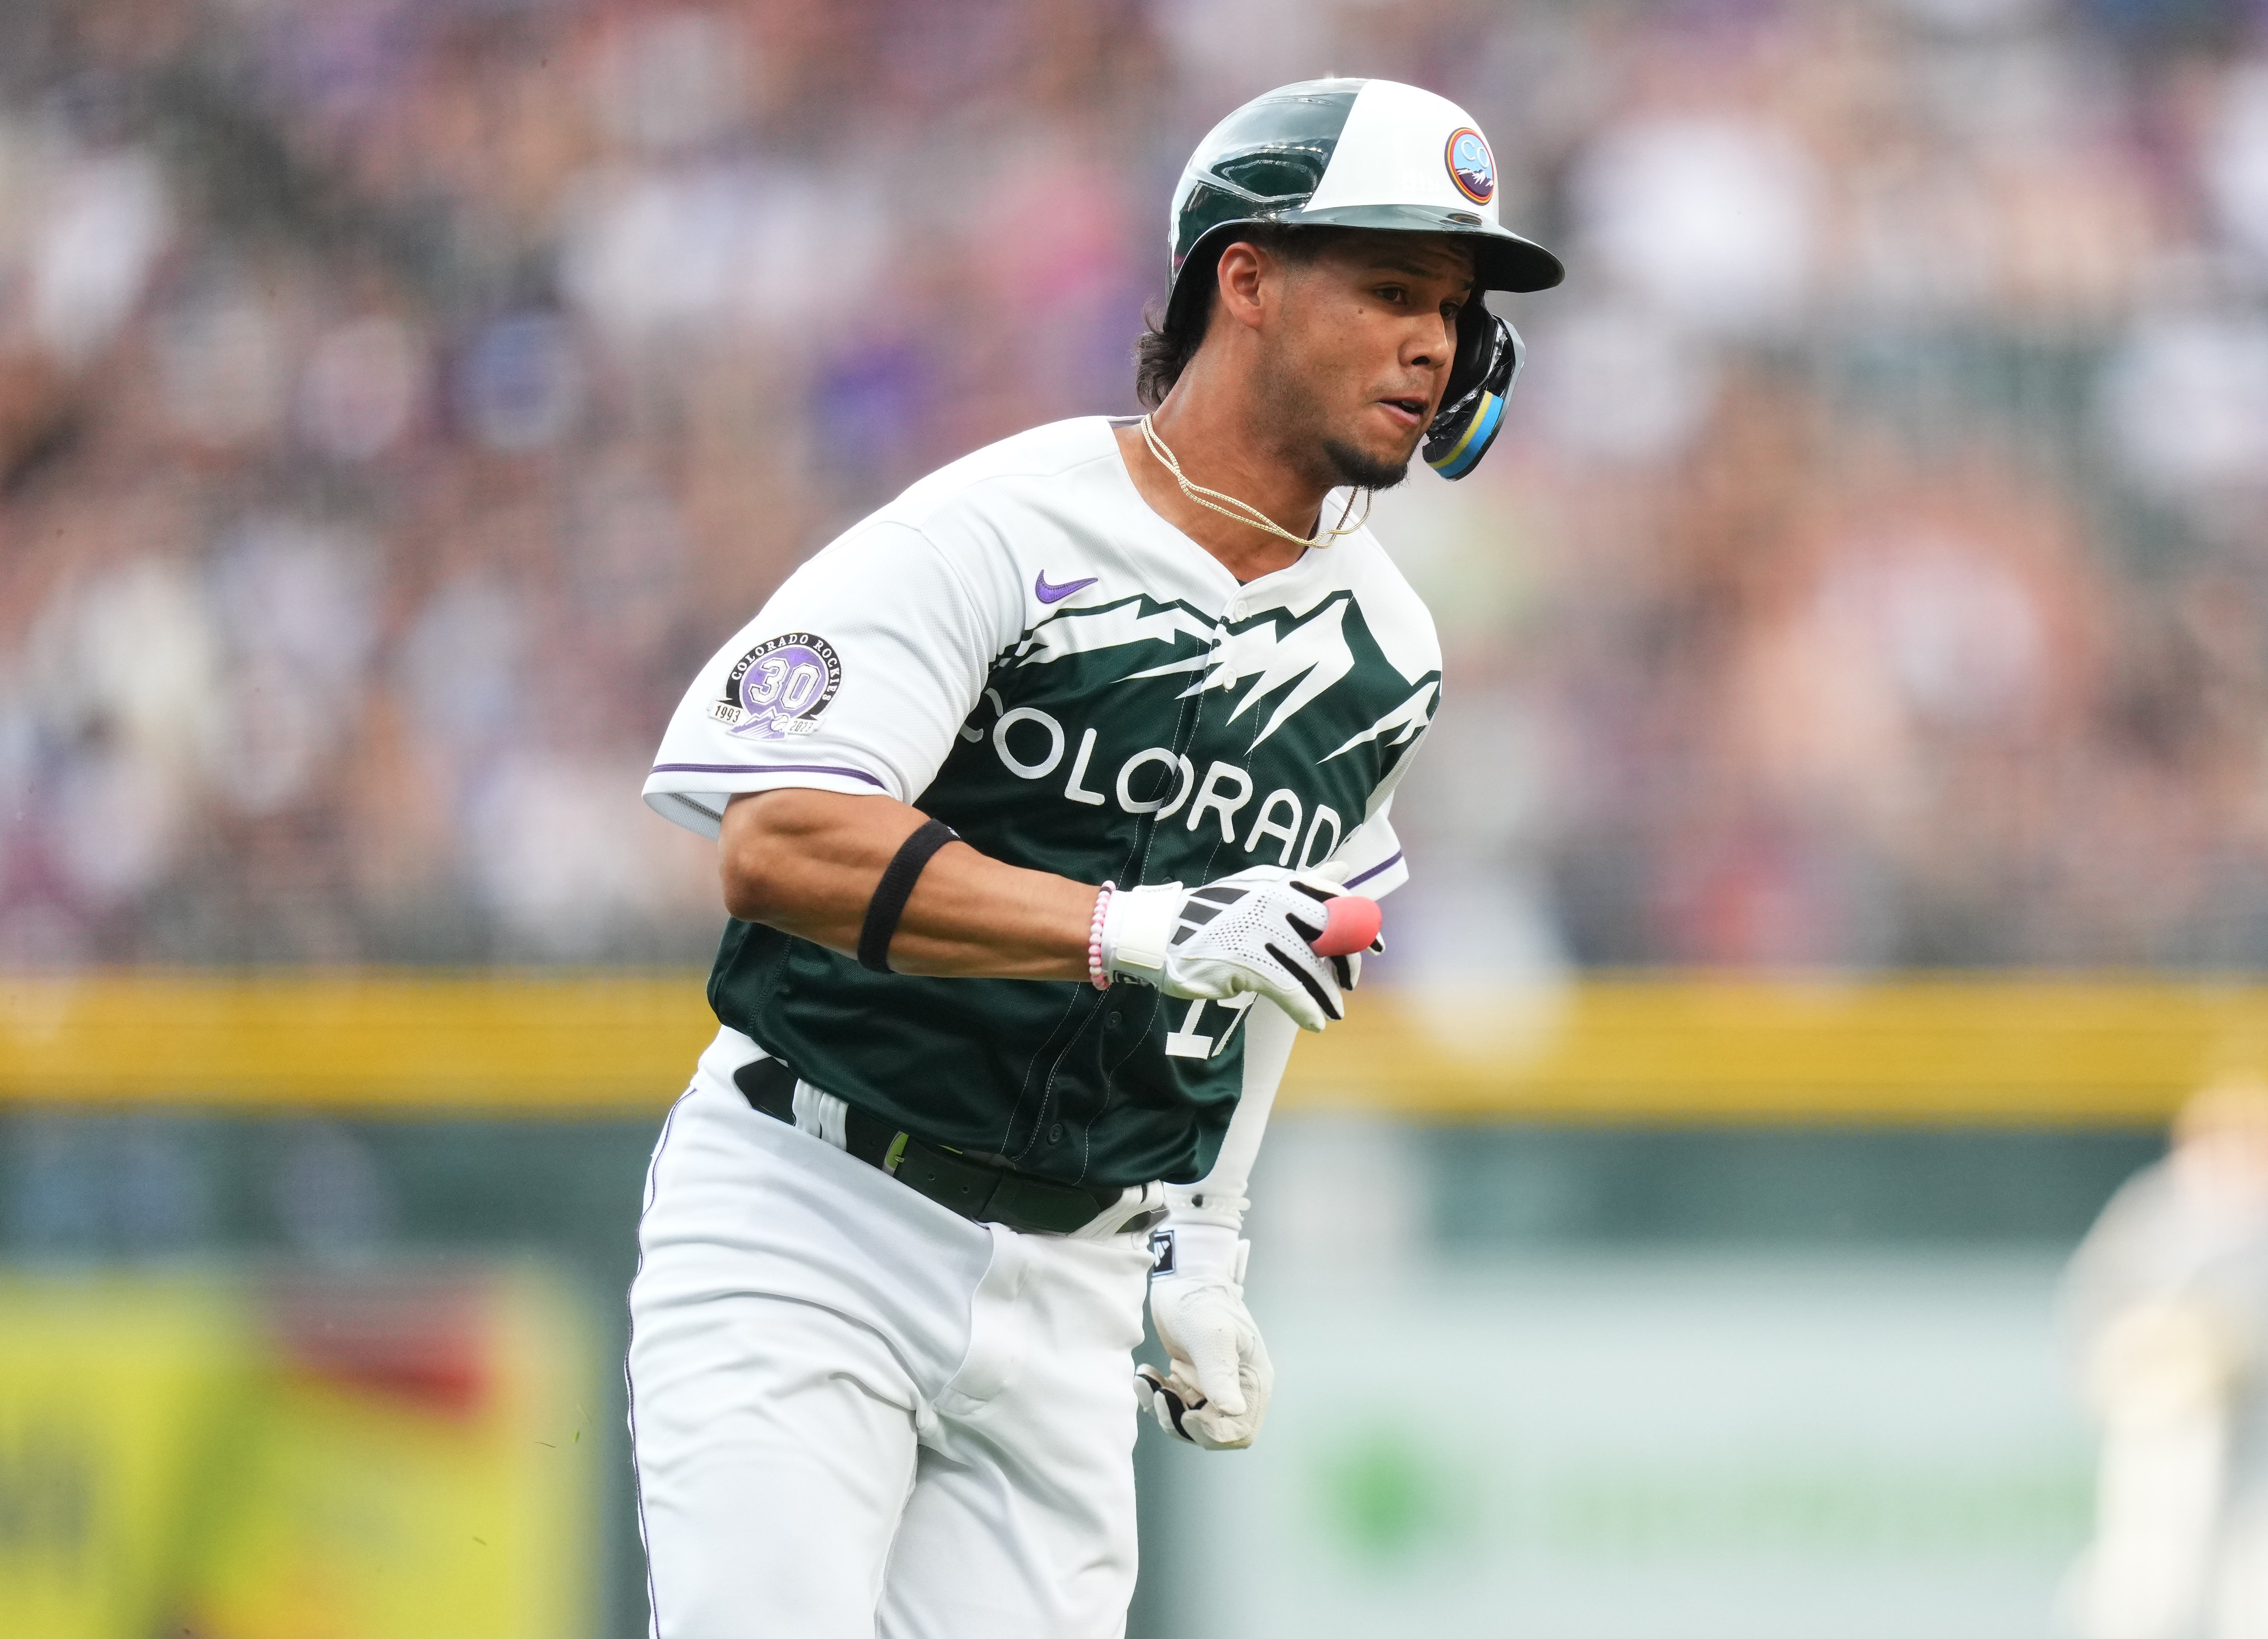 Rockies Roll Over White Sox 11-5 with Standout Performances by Elvis Andrus  and Luis Robert Jr. - BVM Sports